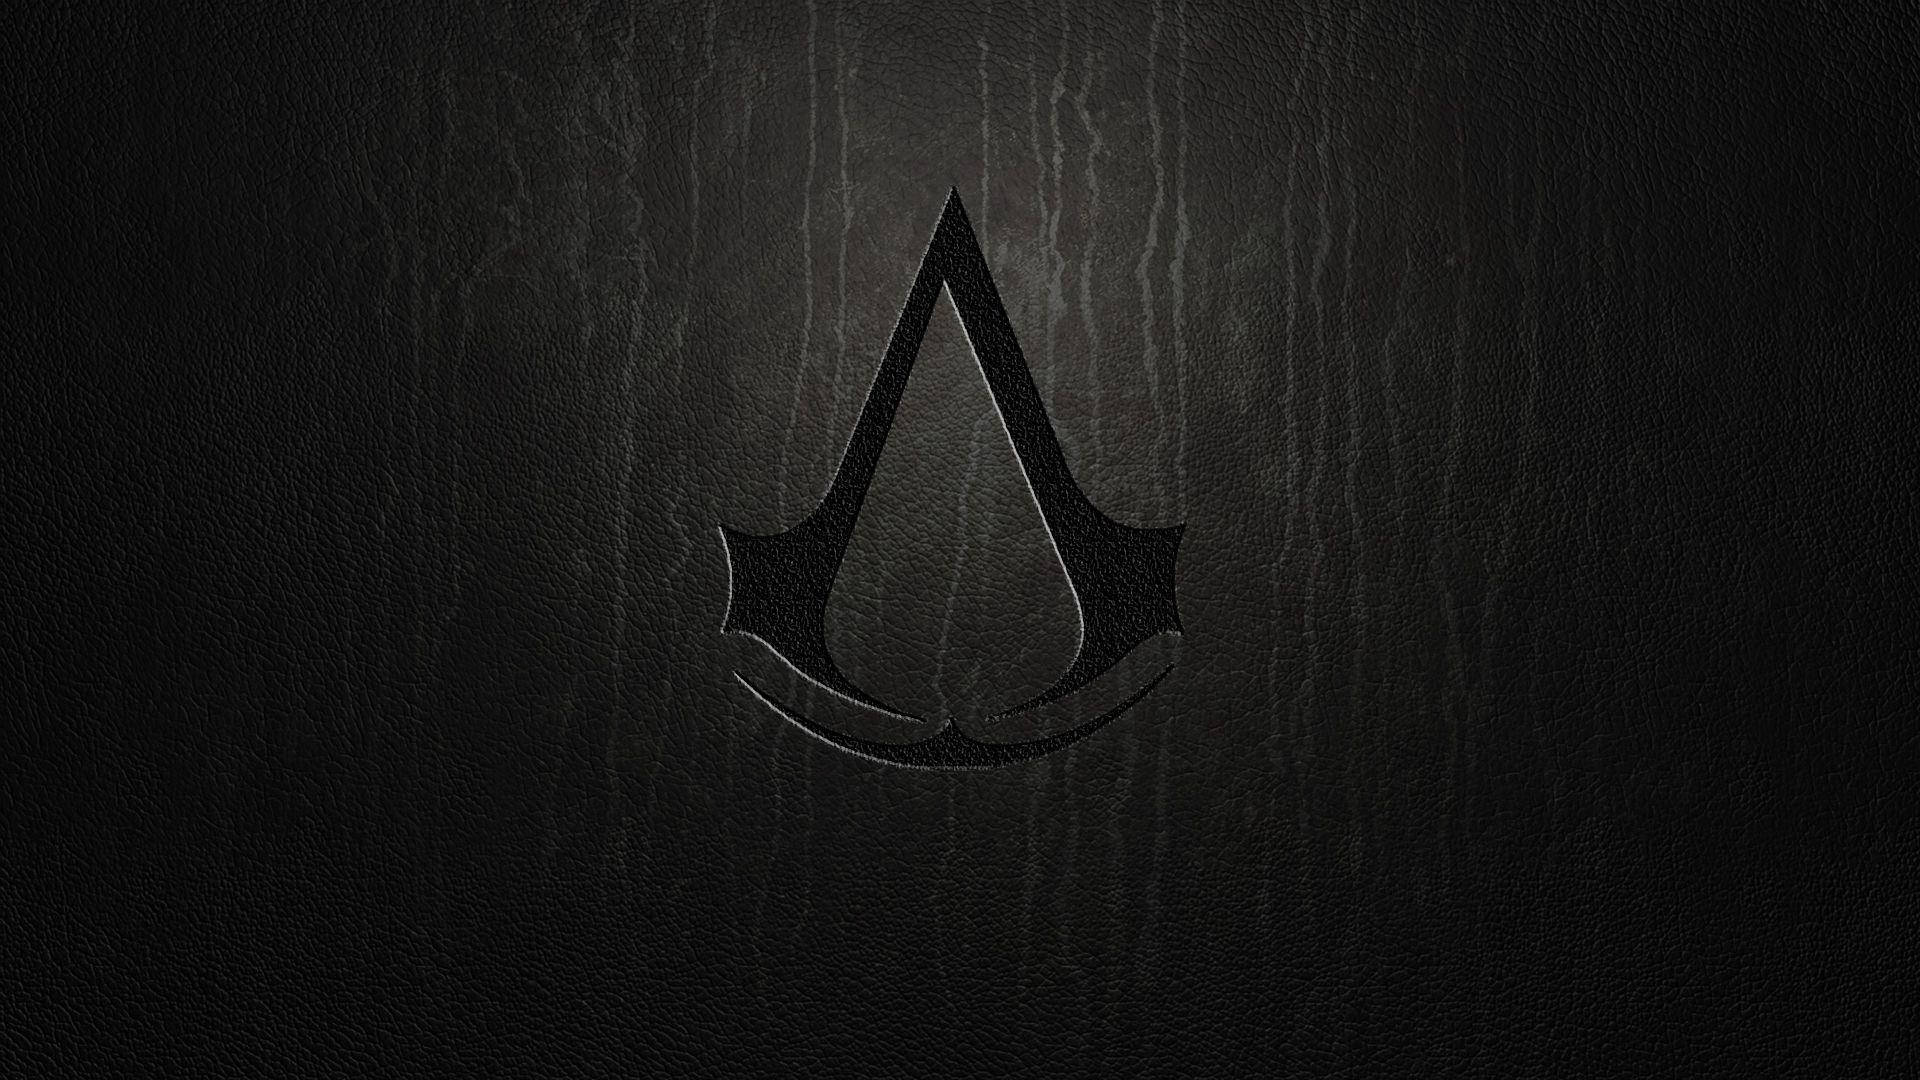 100+] Assassins Creed Iphone Wallpapers | Wallpapers.com